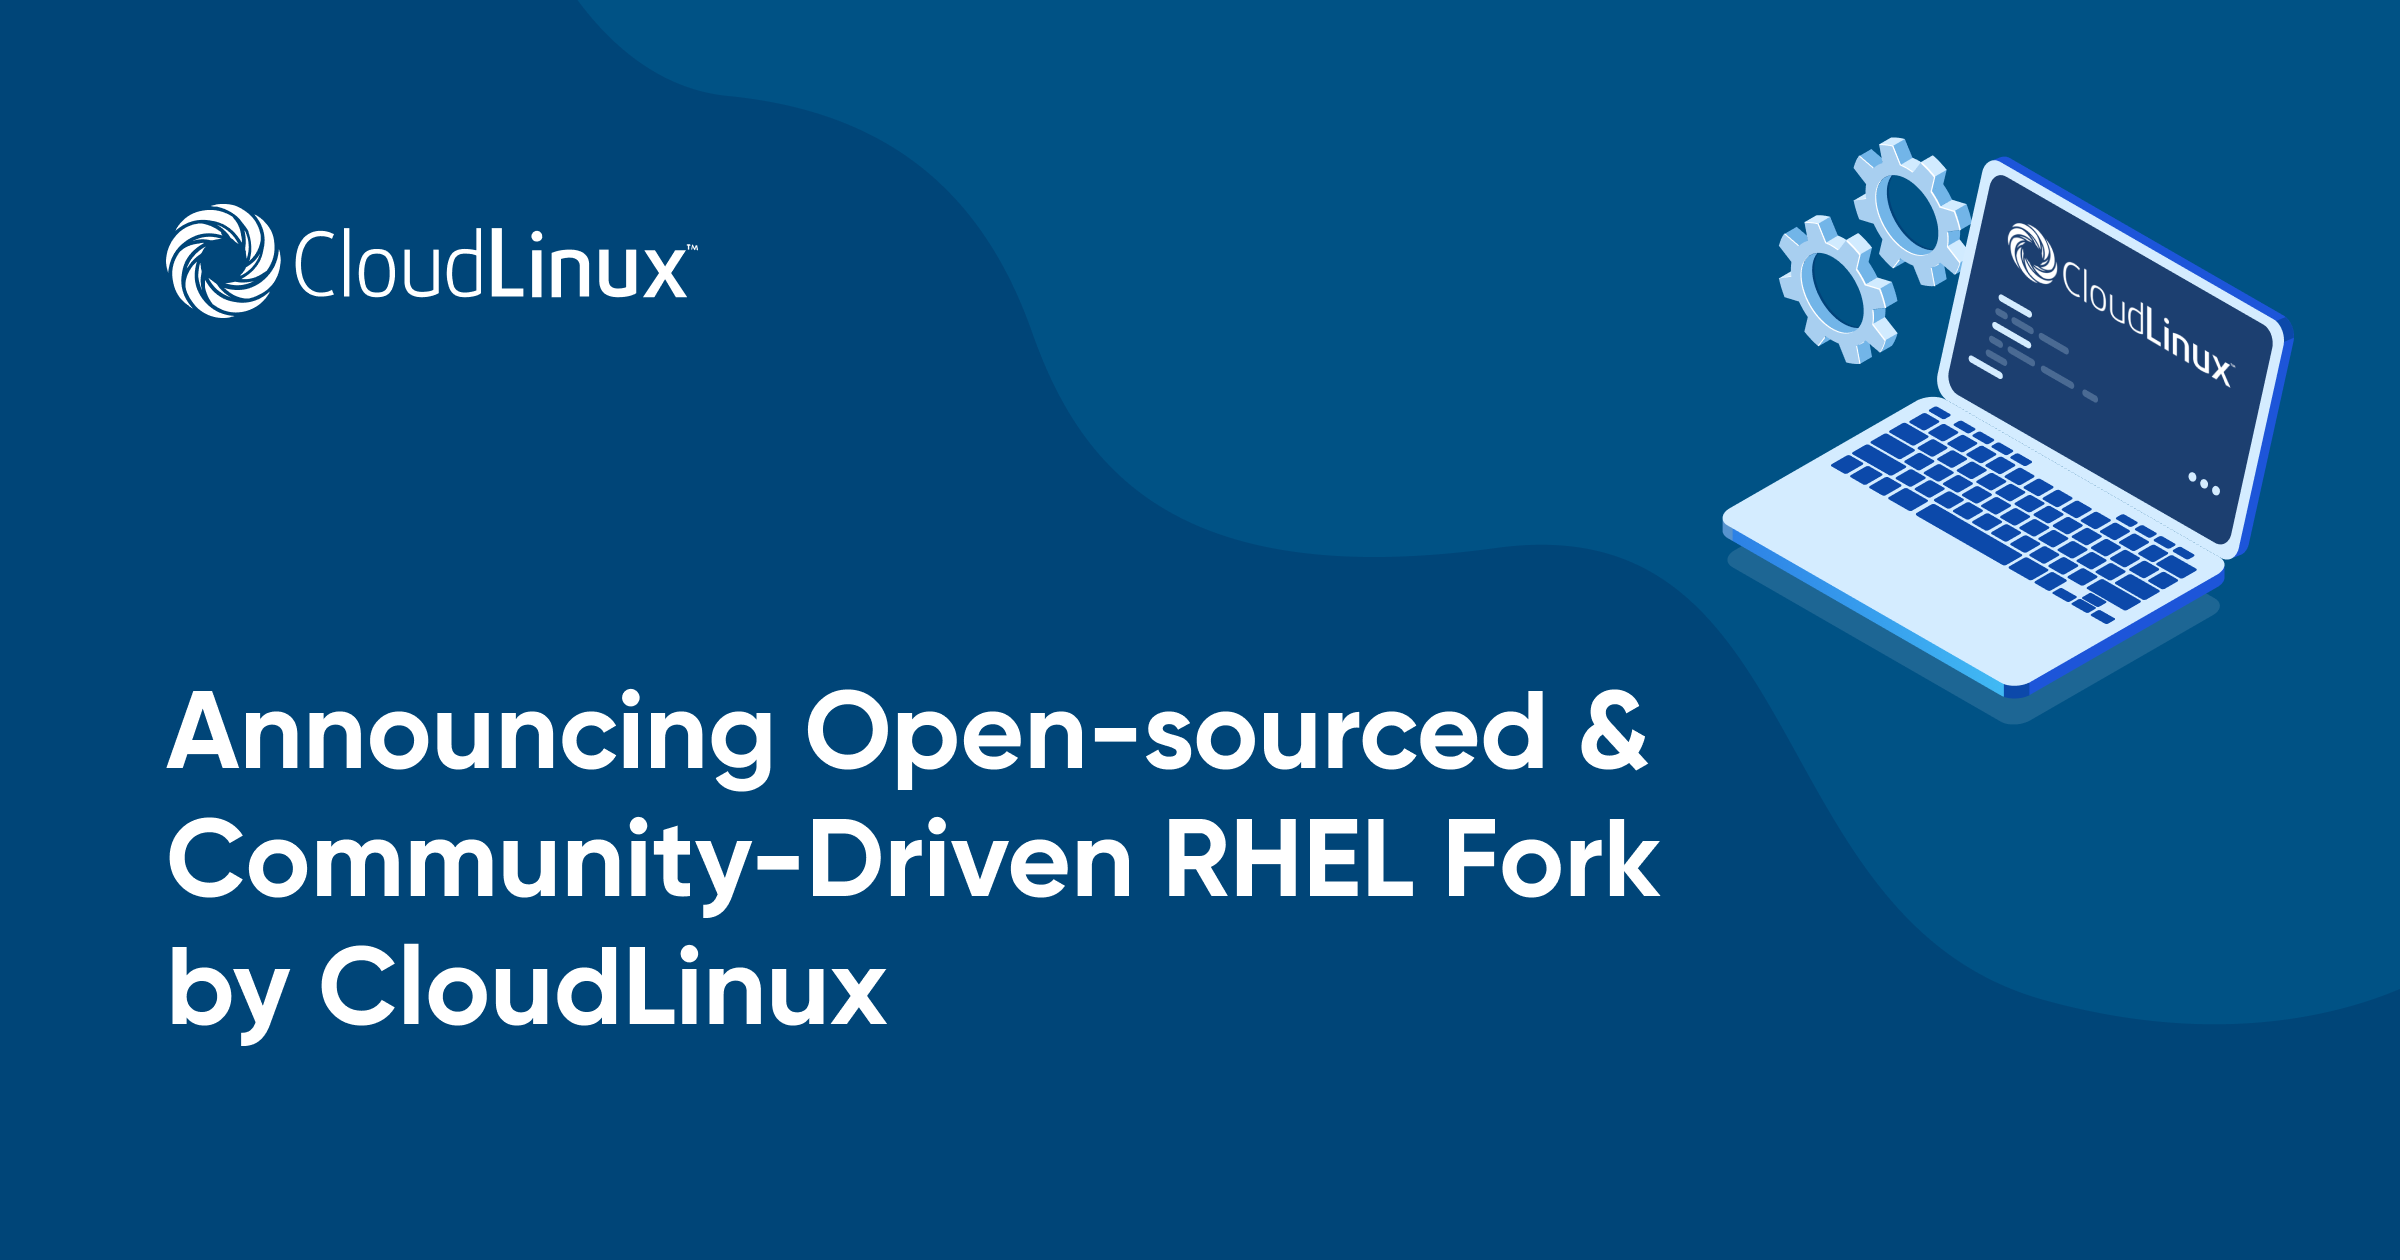 Announcing Open-sourced & Community-Driven RHEL Fork by CloudLinux